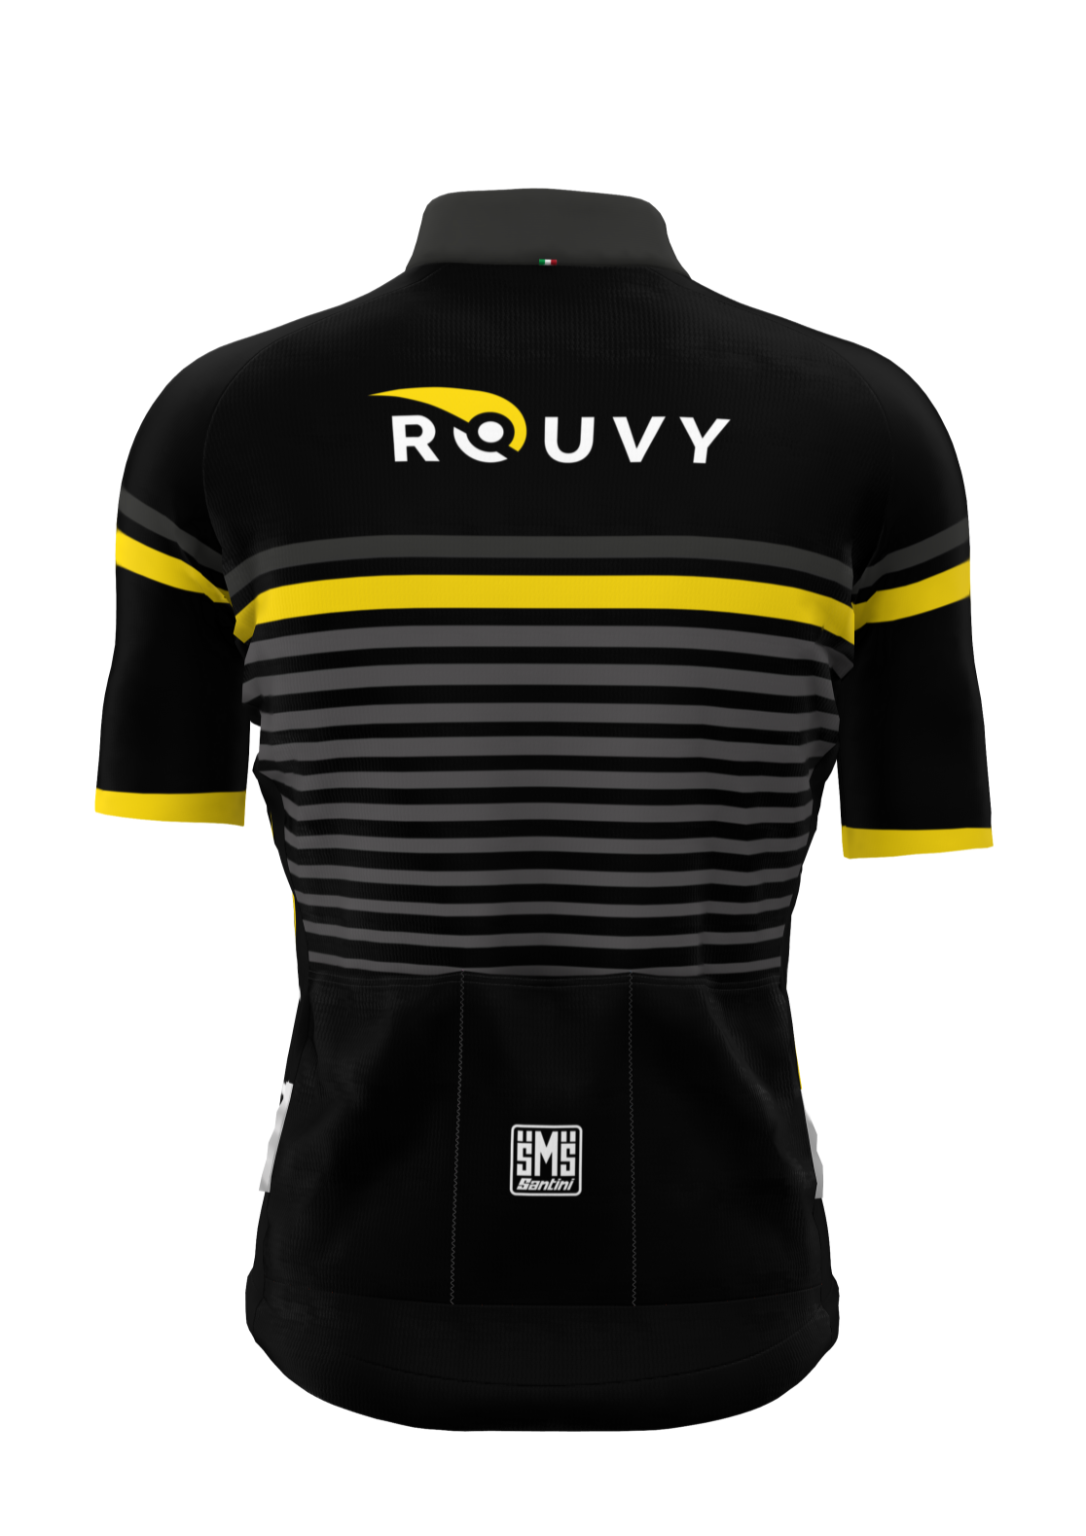 ROUVY Jersey - Men's (2022 collection)